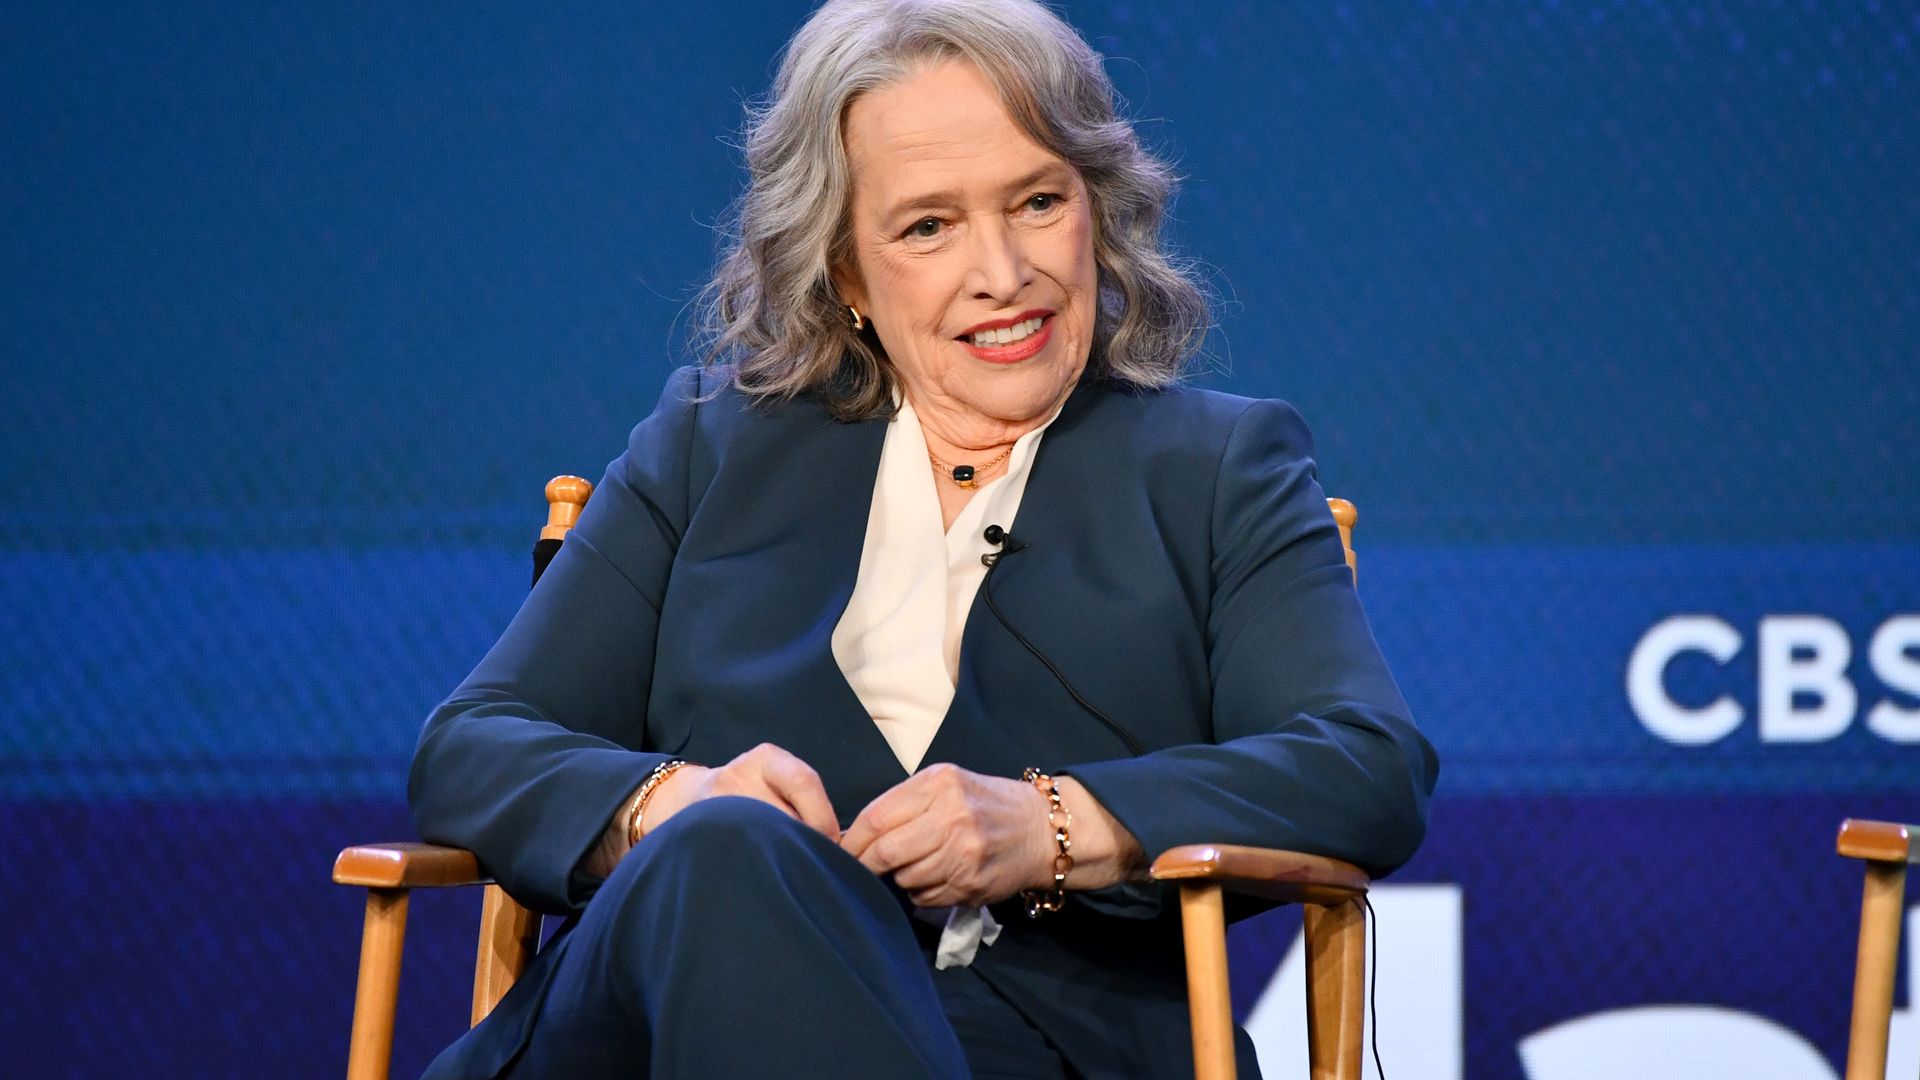 Kathy Bates showcases incredible weight loss and youthful new look in stunning outing